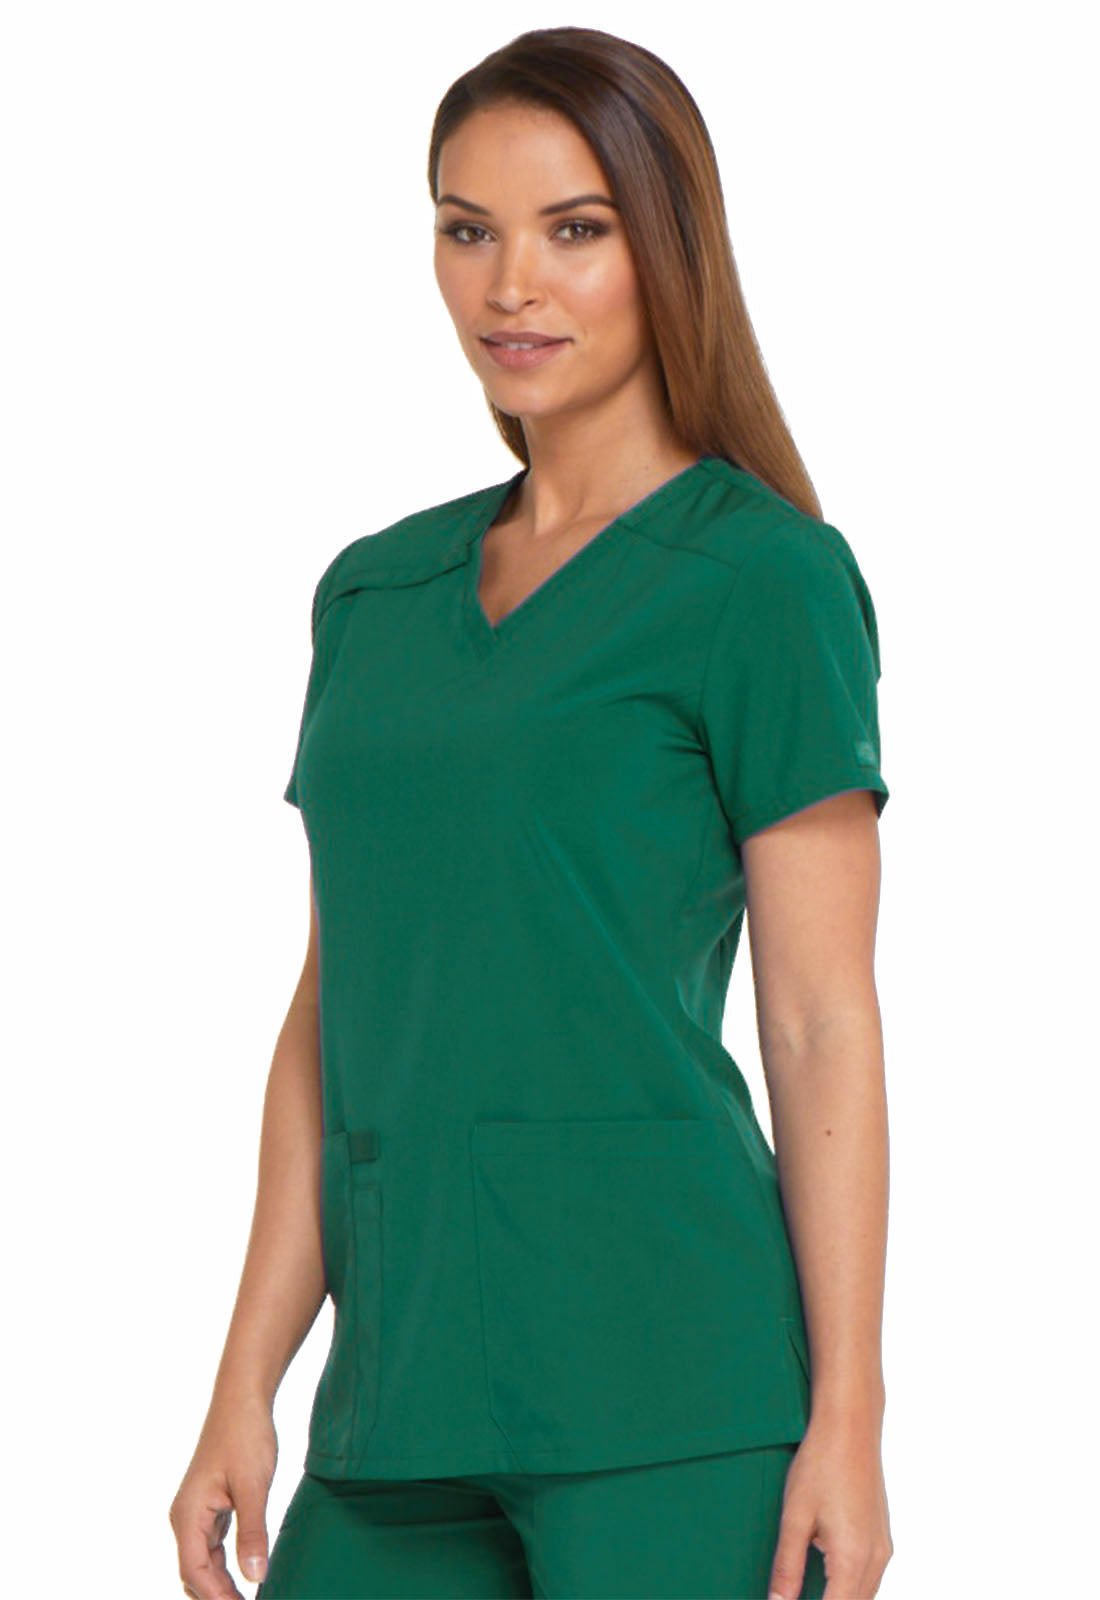 Dickies EDS Essentials V Neck Top DK615 in Caribbean, Hunter, Hot Pink, Olive, Red, White - Scrubs Select